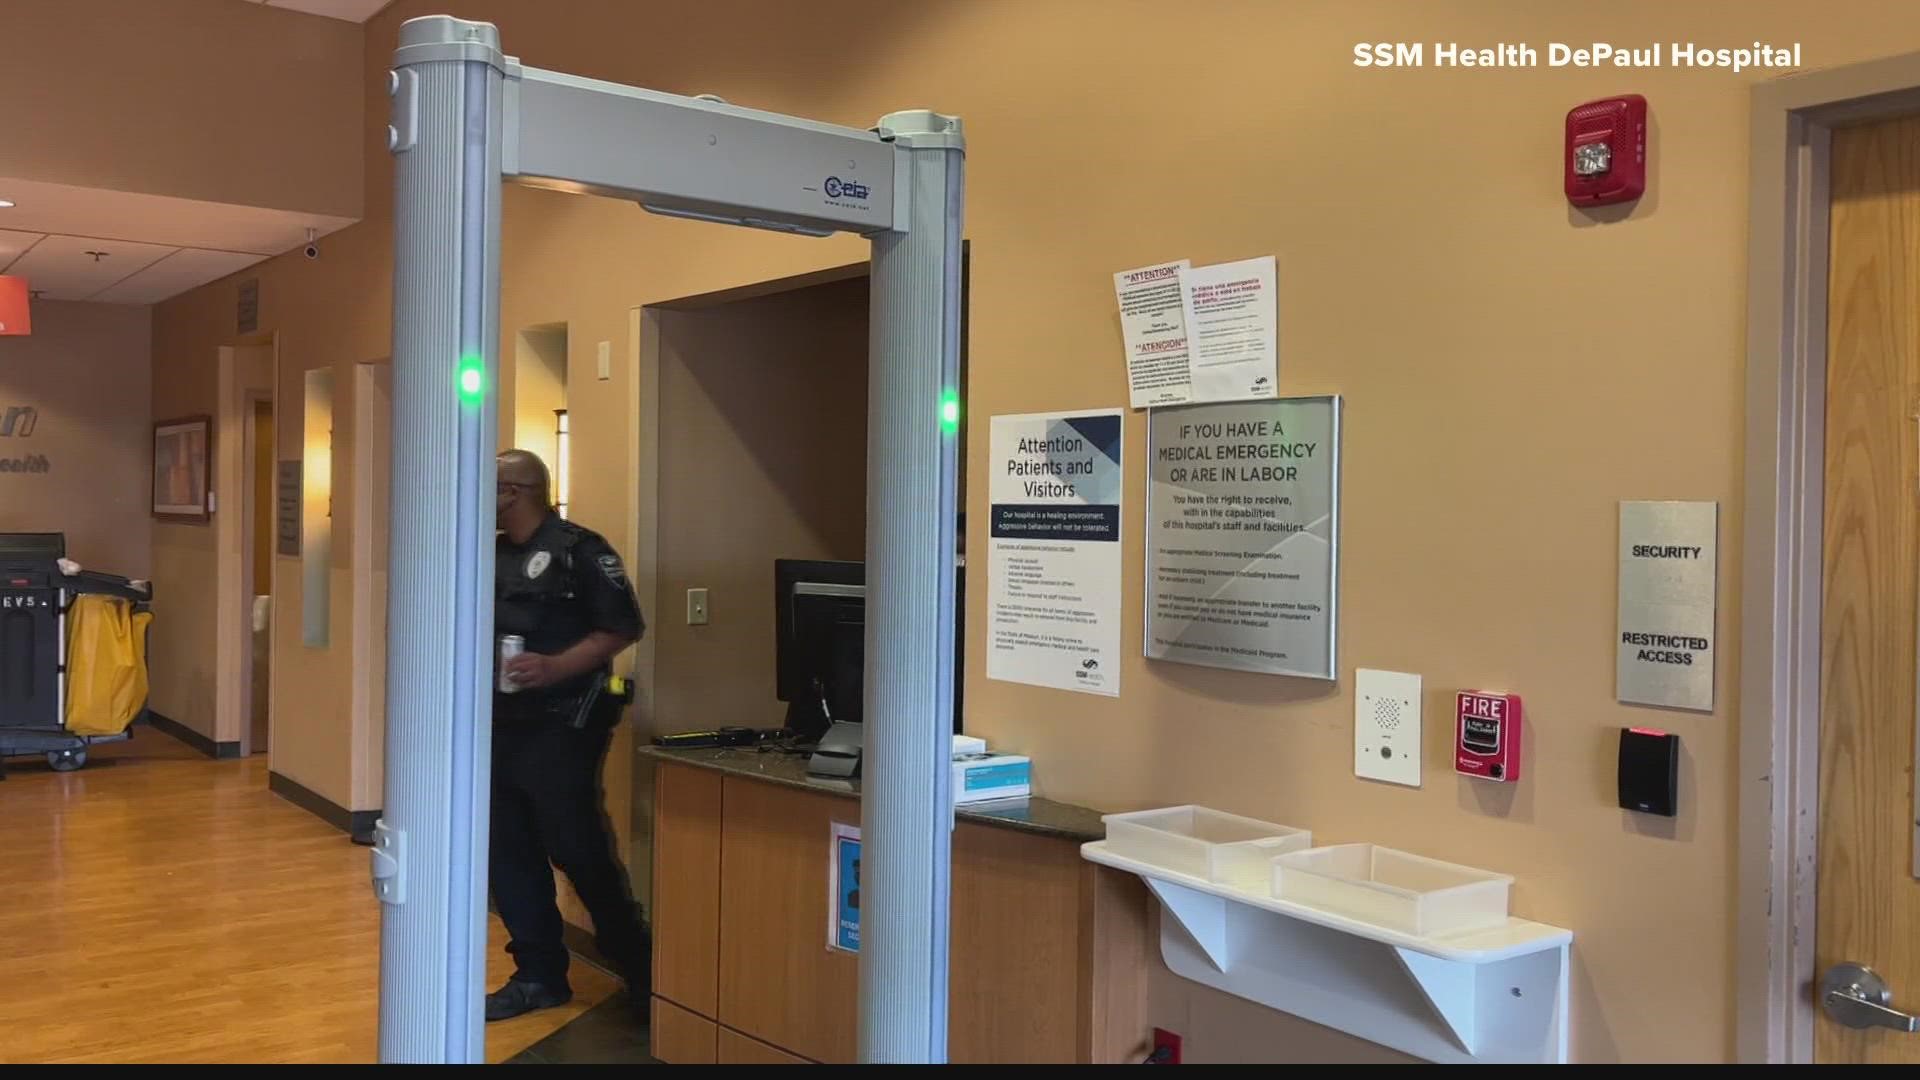 SSM Health DePaul Hospital added a metal detector and a 24-hour security guard to the emergency department.